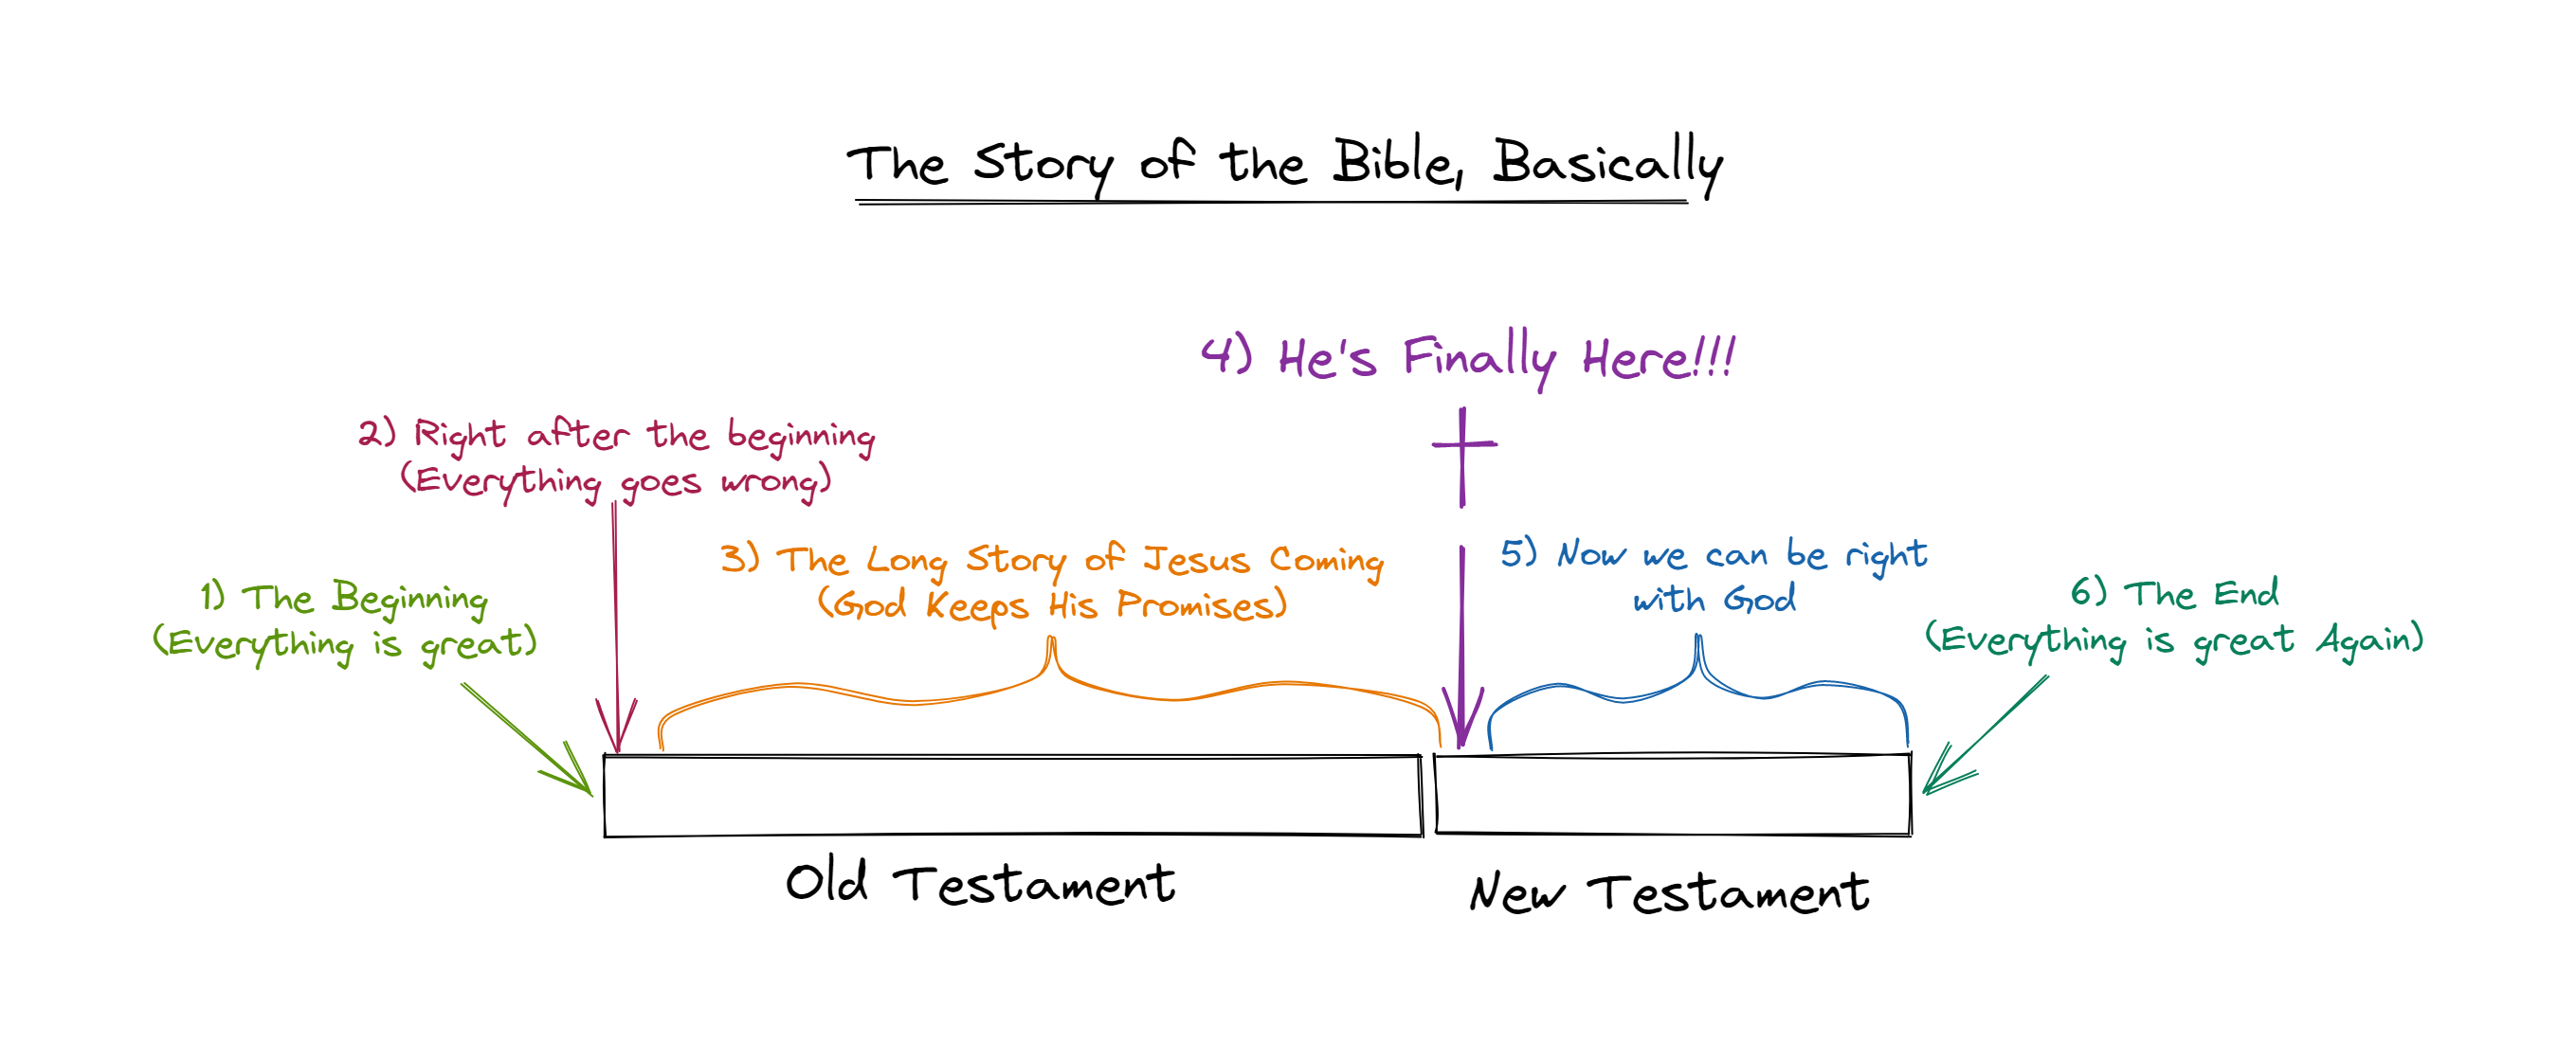 The Story of the Bible Basically